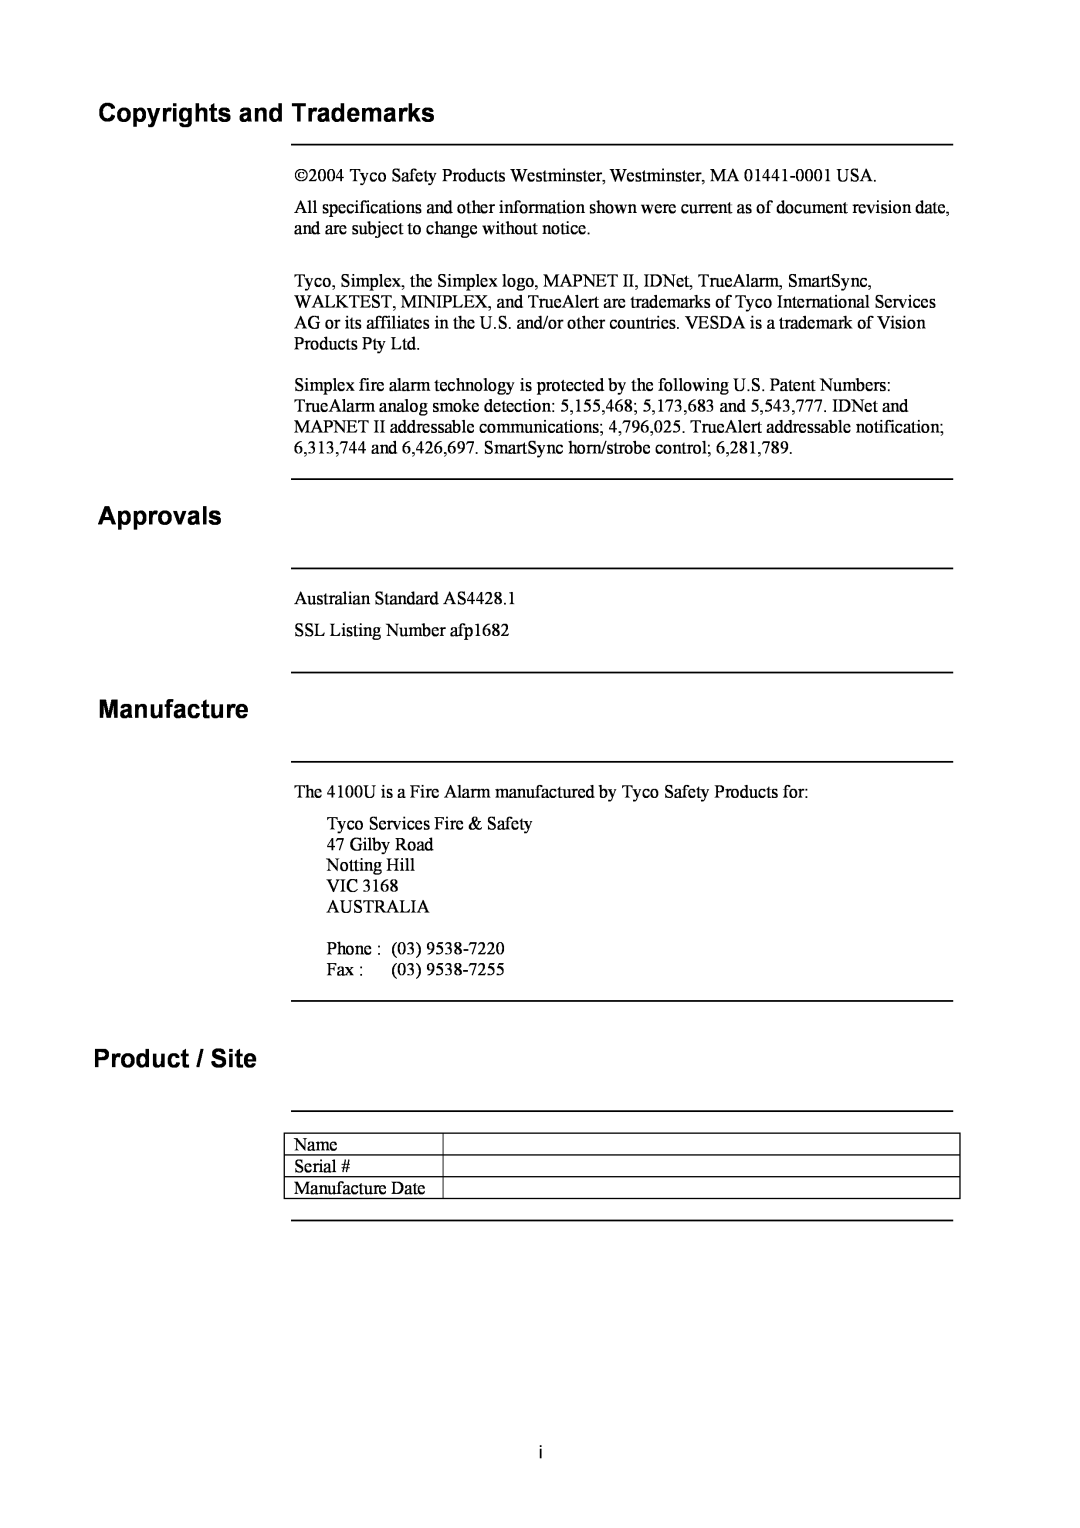 Tyco 4100U installation manual Copyrights and Trademarks, Approvals, Manufacture, Product / Site 